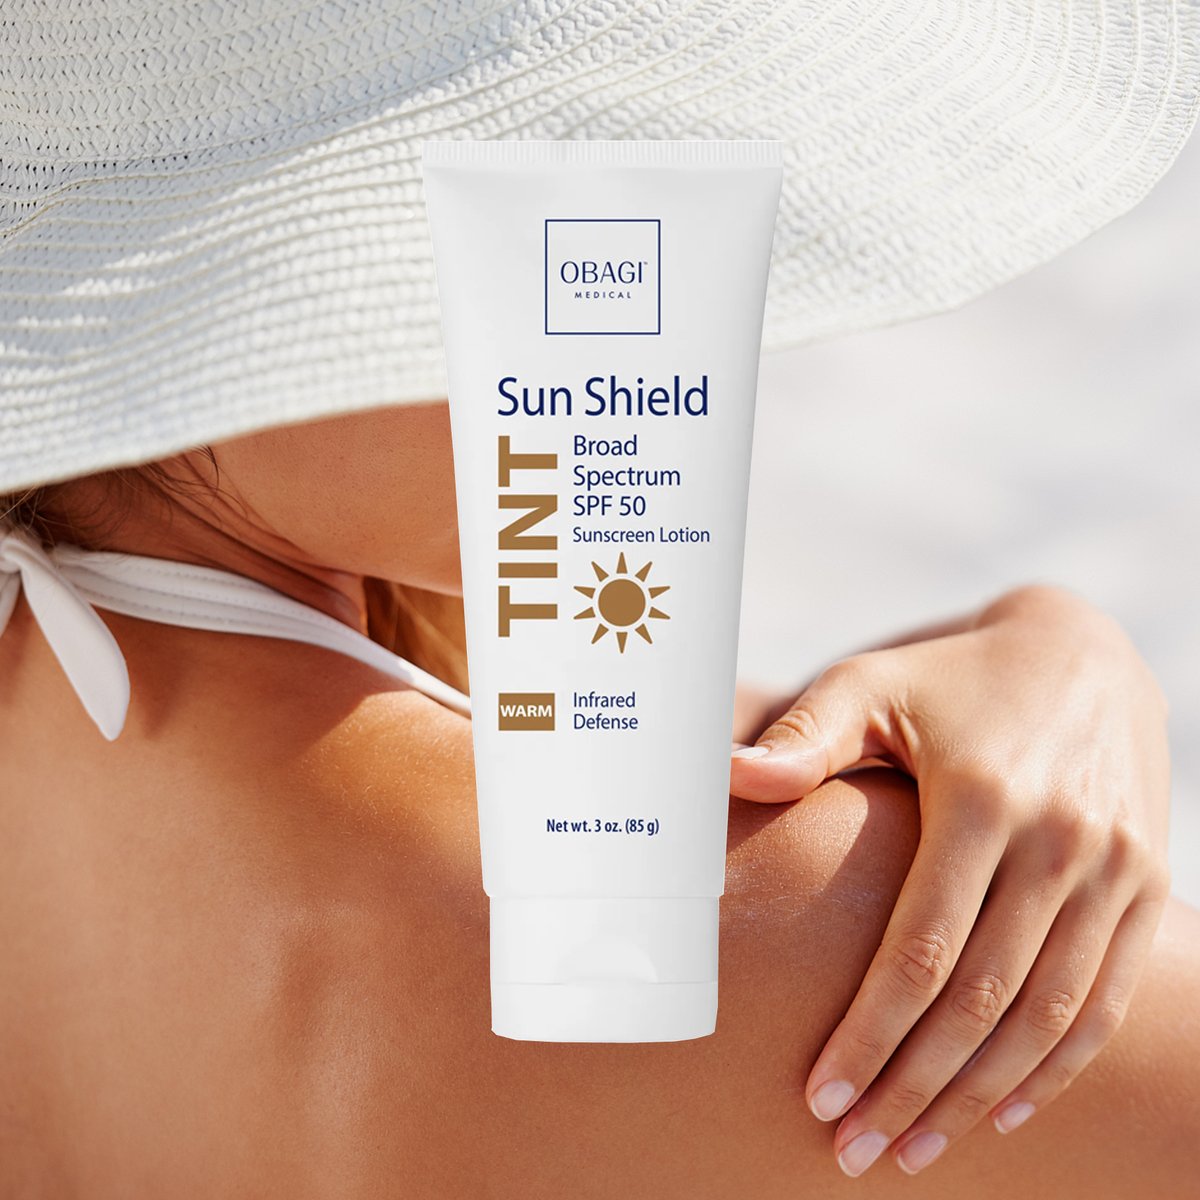 The Obagi Tinted Sun Shield SPF 50 Warm sun screen provides complete protection against both UVA and UVB rays. Recommended for darker complexions with yellow, gold or olive undertones. clinicalskincare.co.uk/product/obagi-…